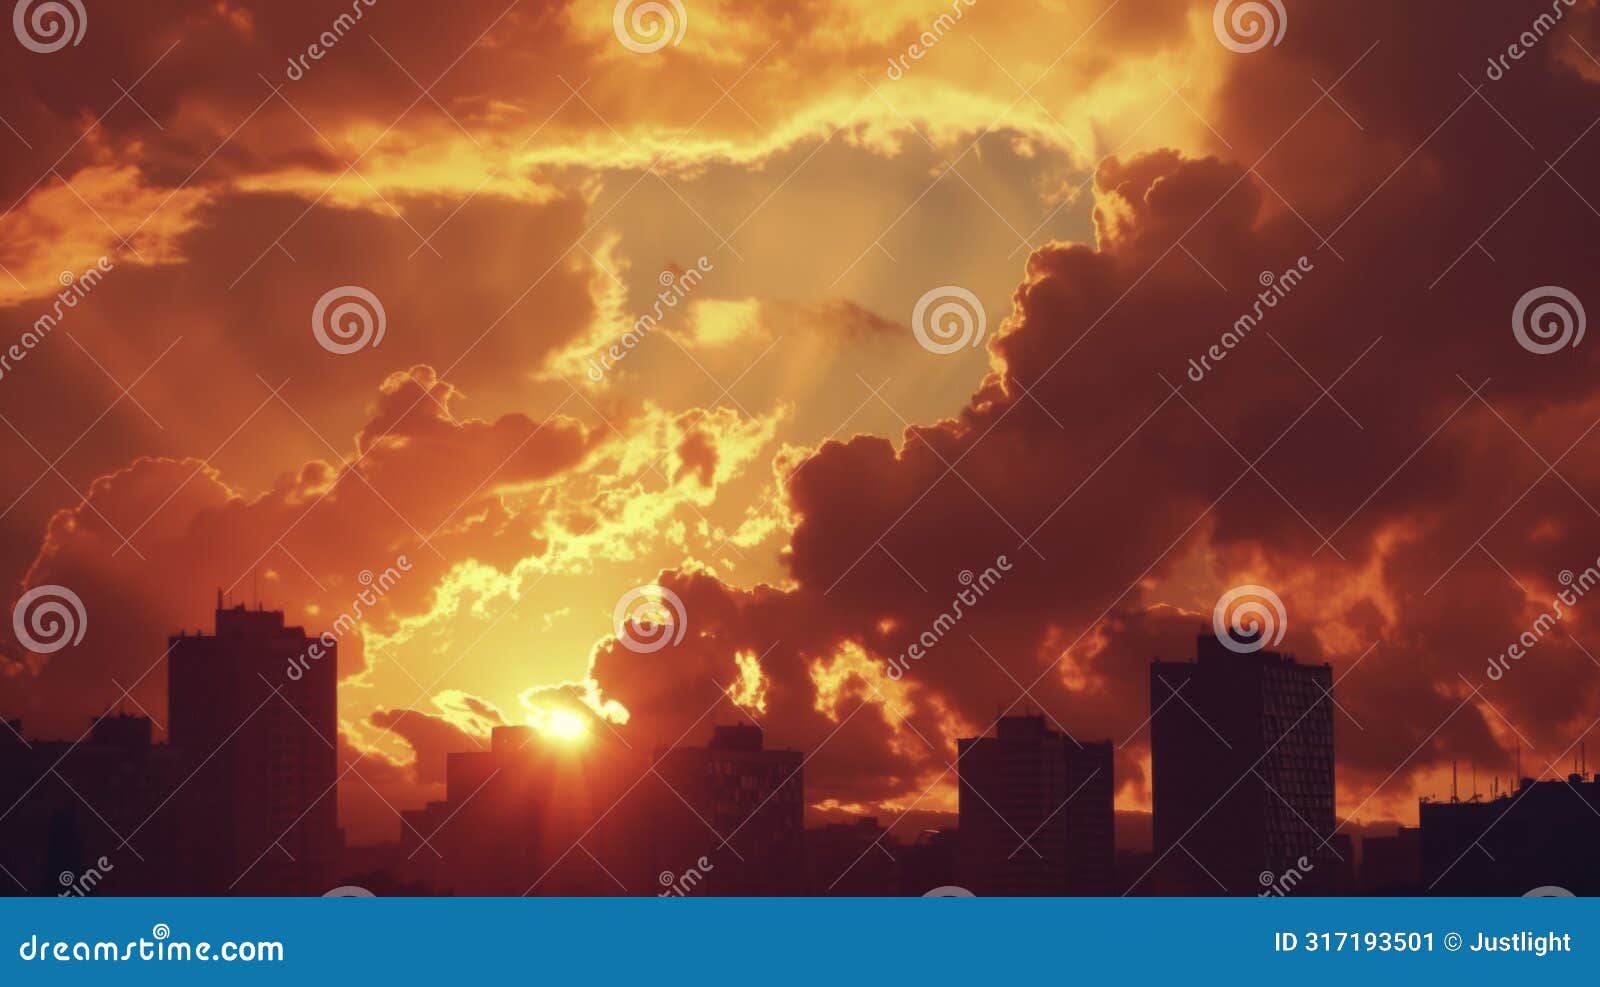 a backdrop of fiery clouds behind the citys iconic architecture